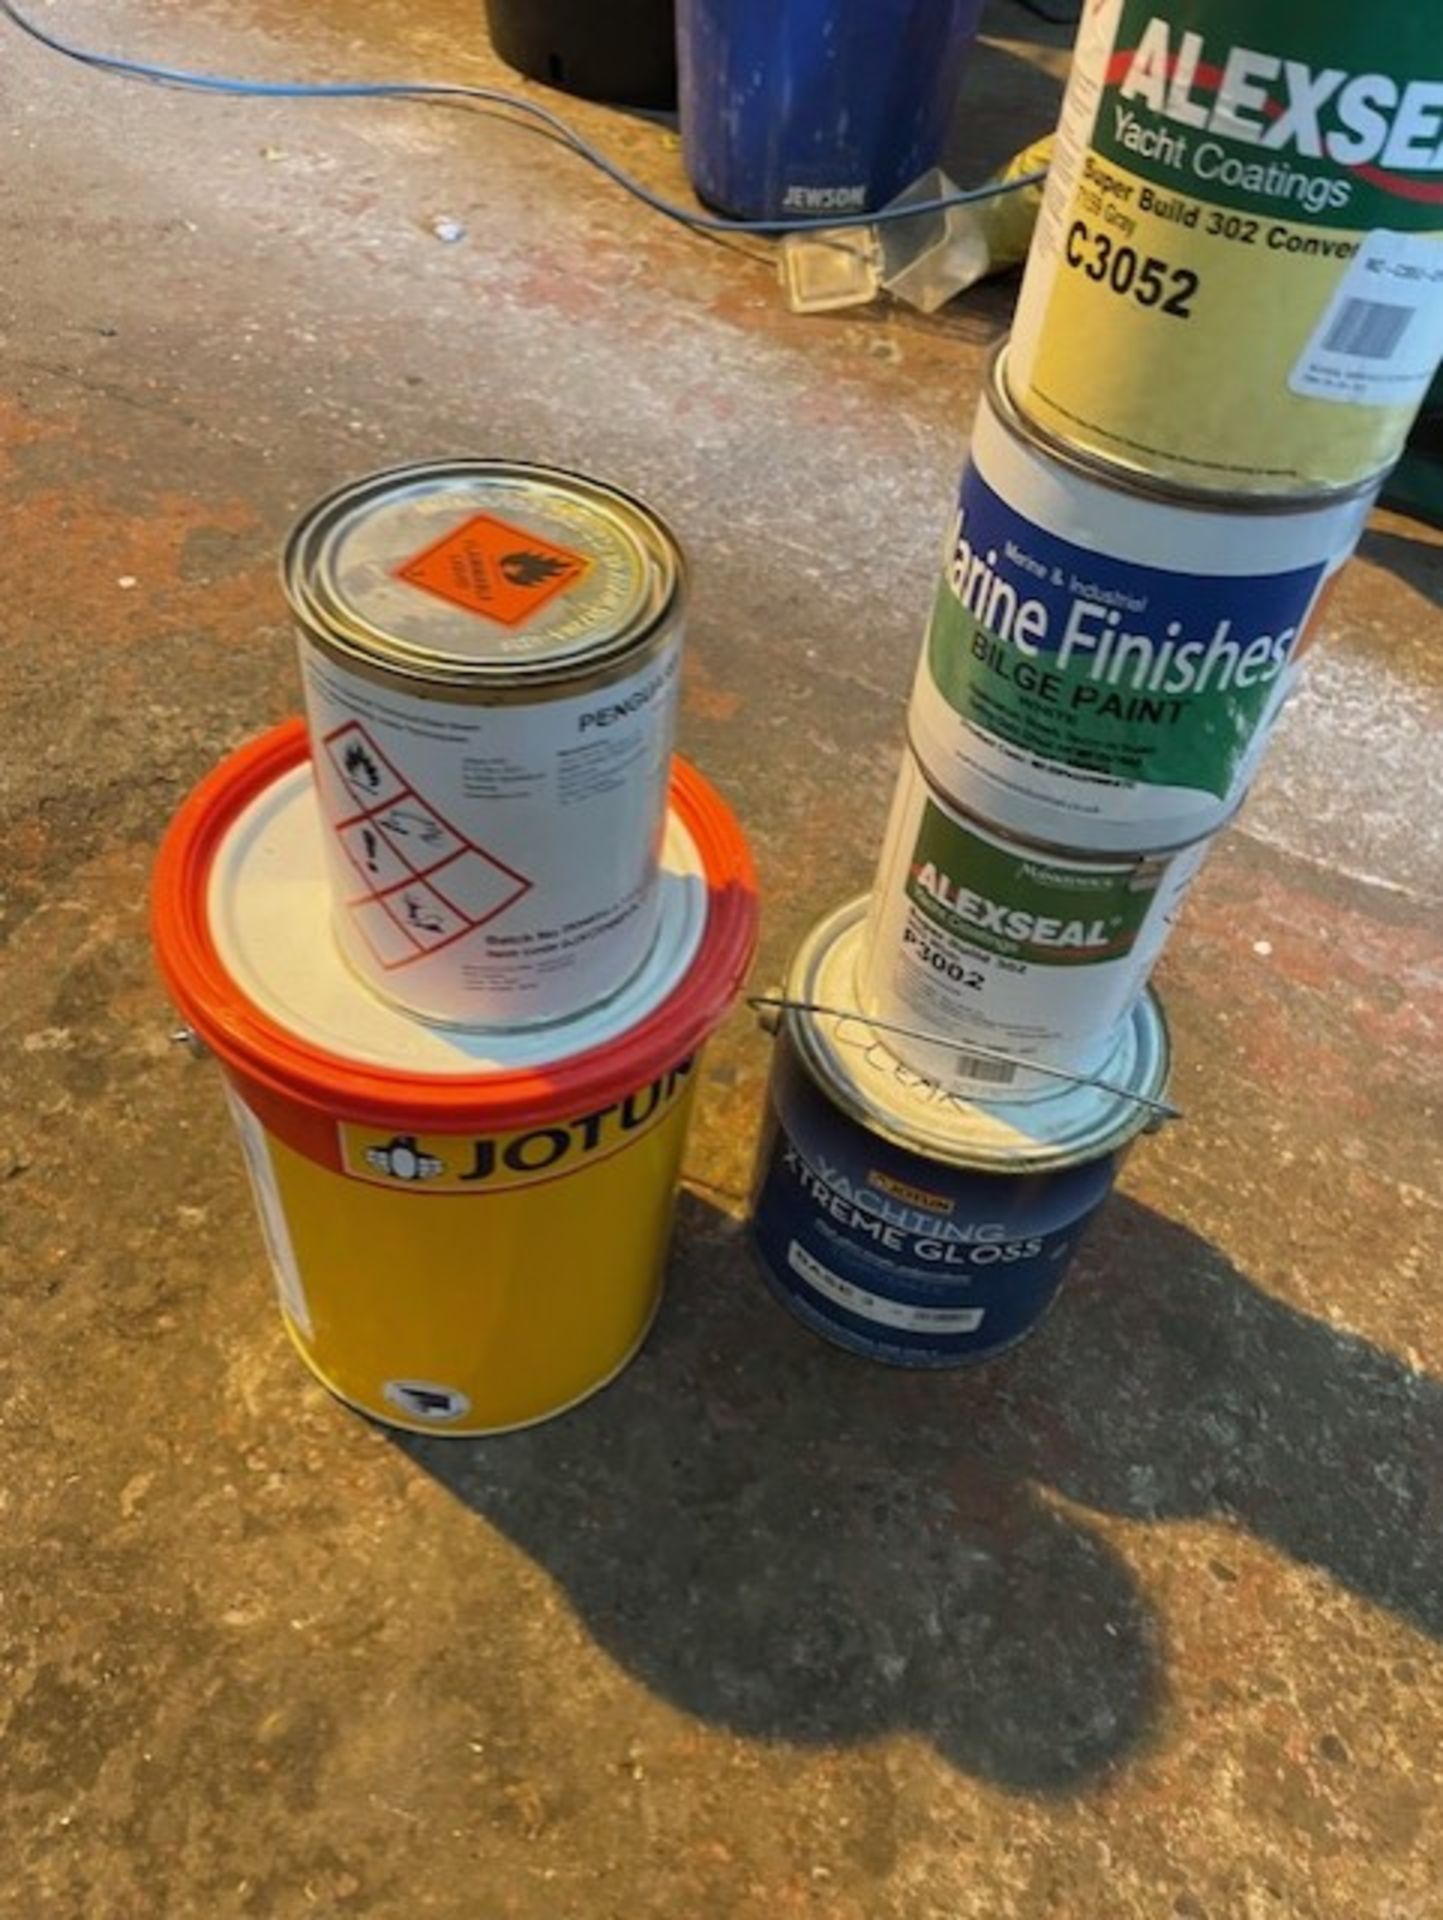 Yacht and boat paint full tins of Super build converter gray c3052 Bilge paint white Super build - Image 4 of 4